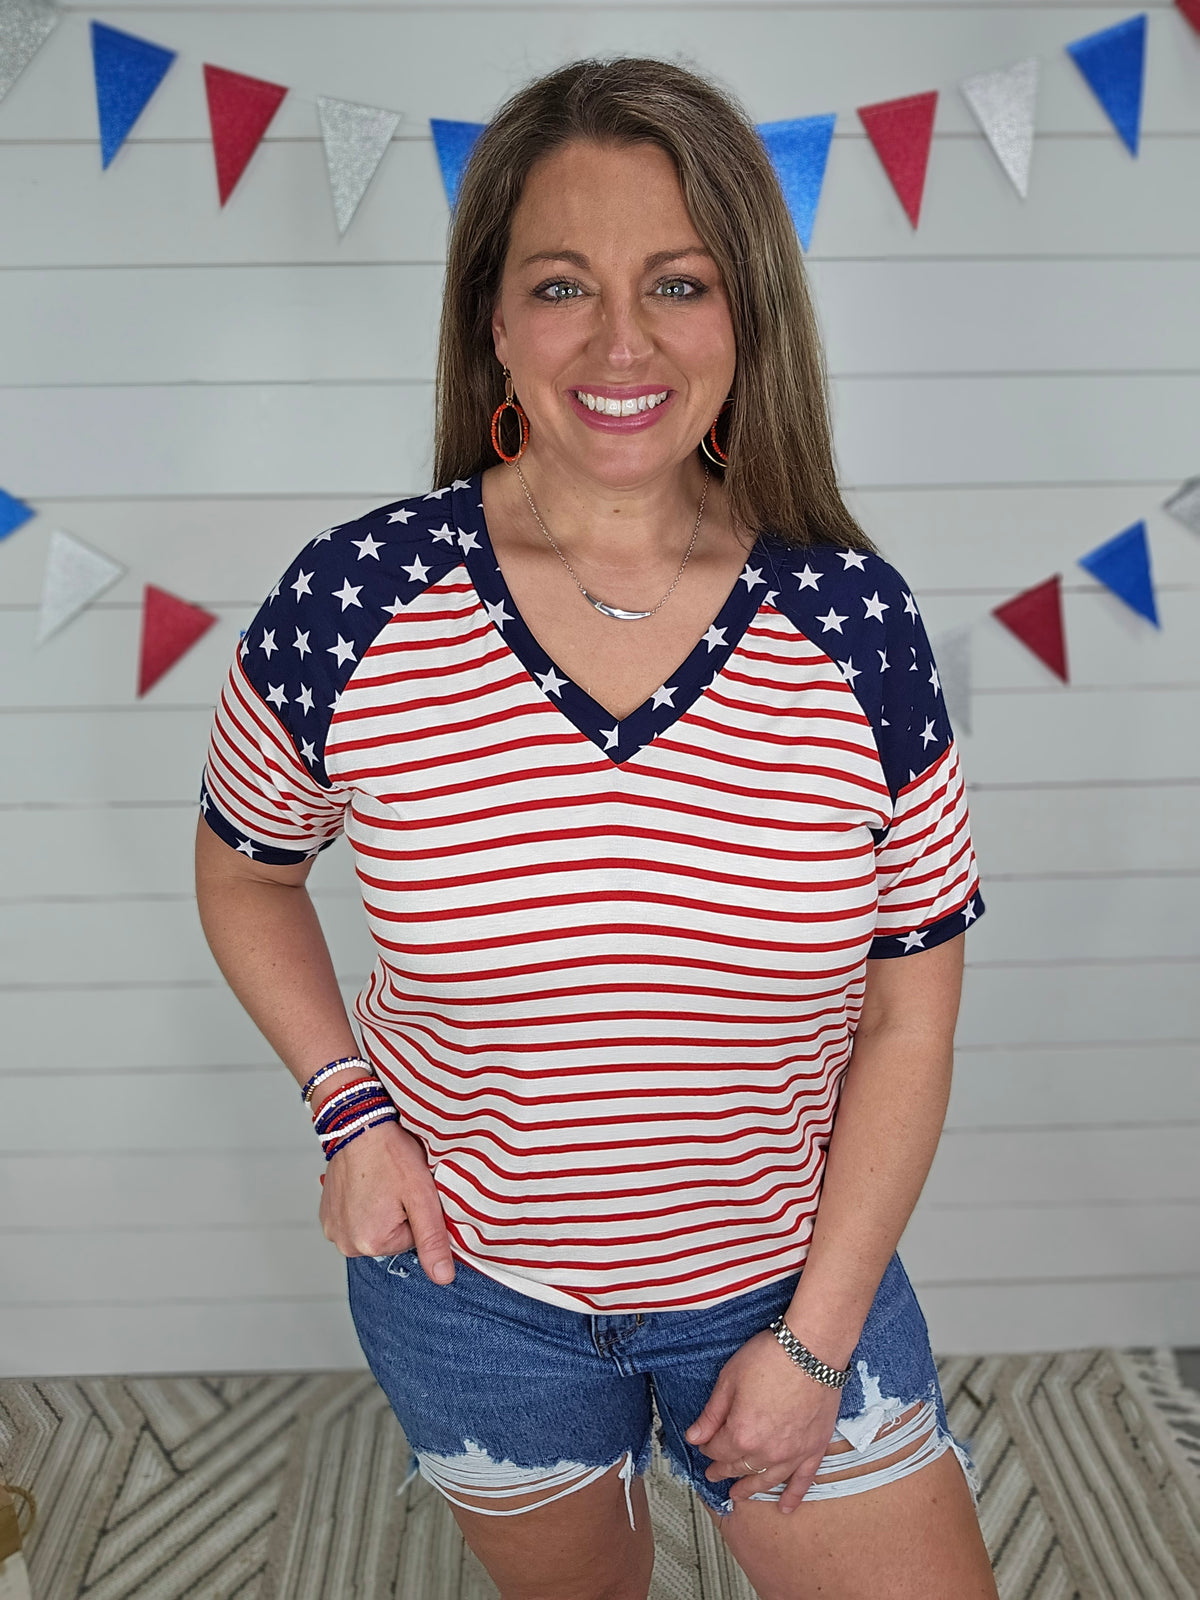 RED/WHITE STRIPED V NECK TOP W/ STAR ACCENT